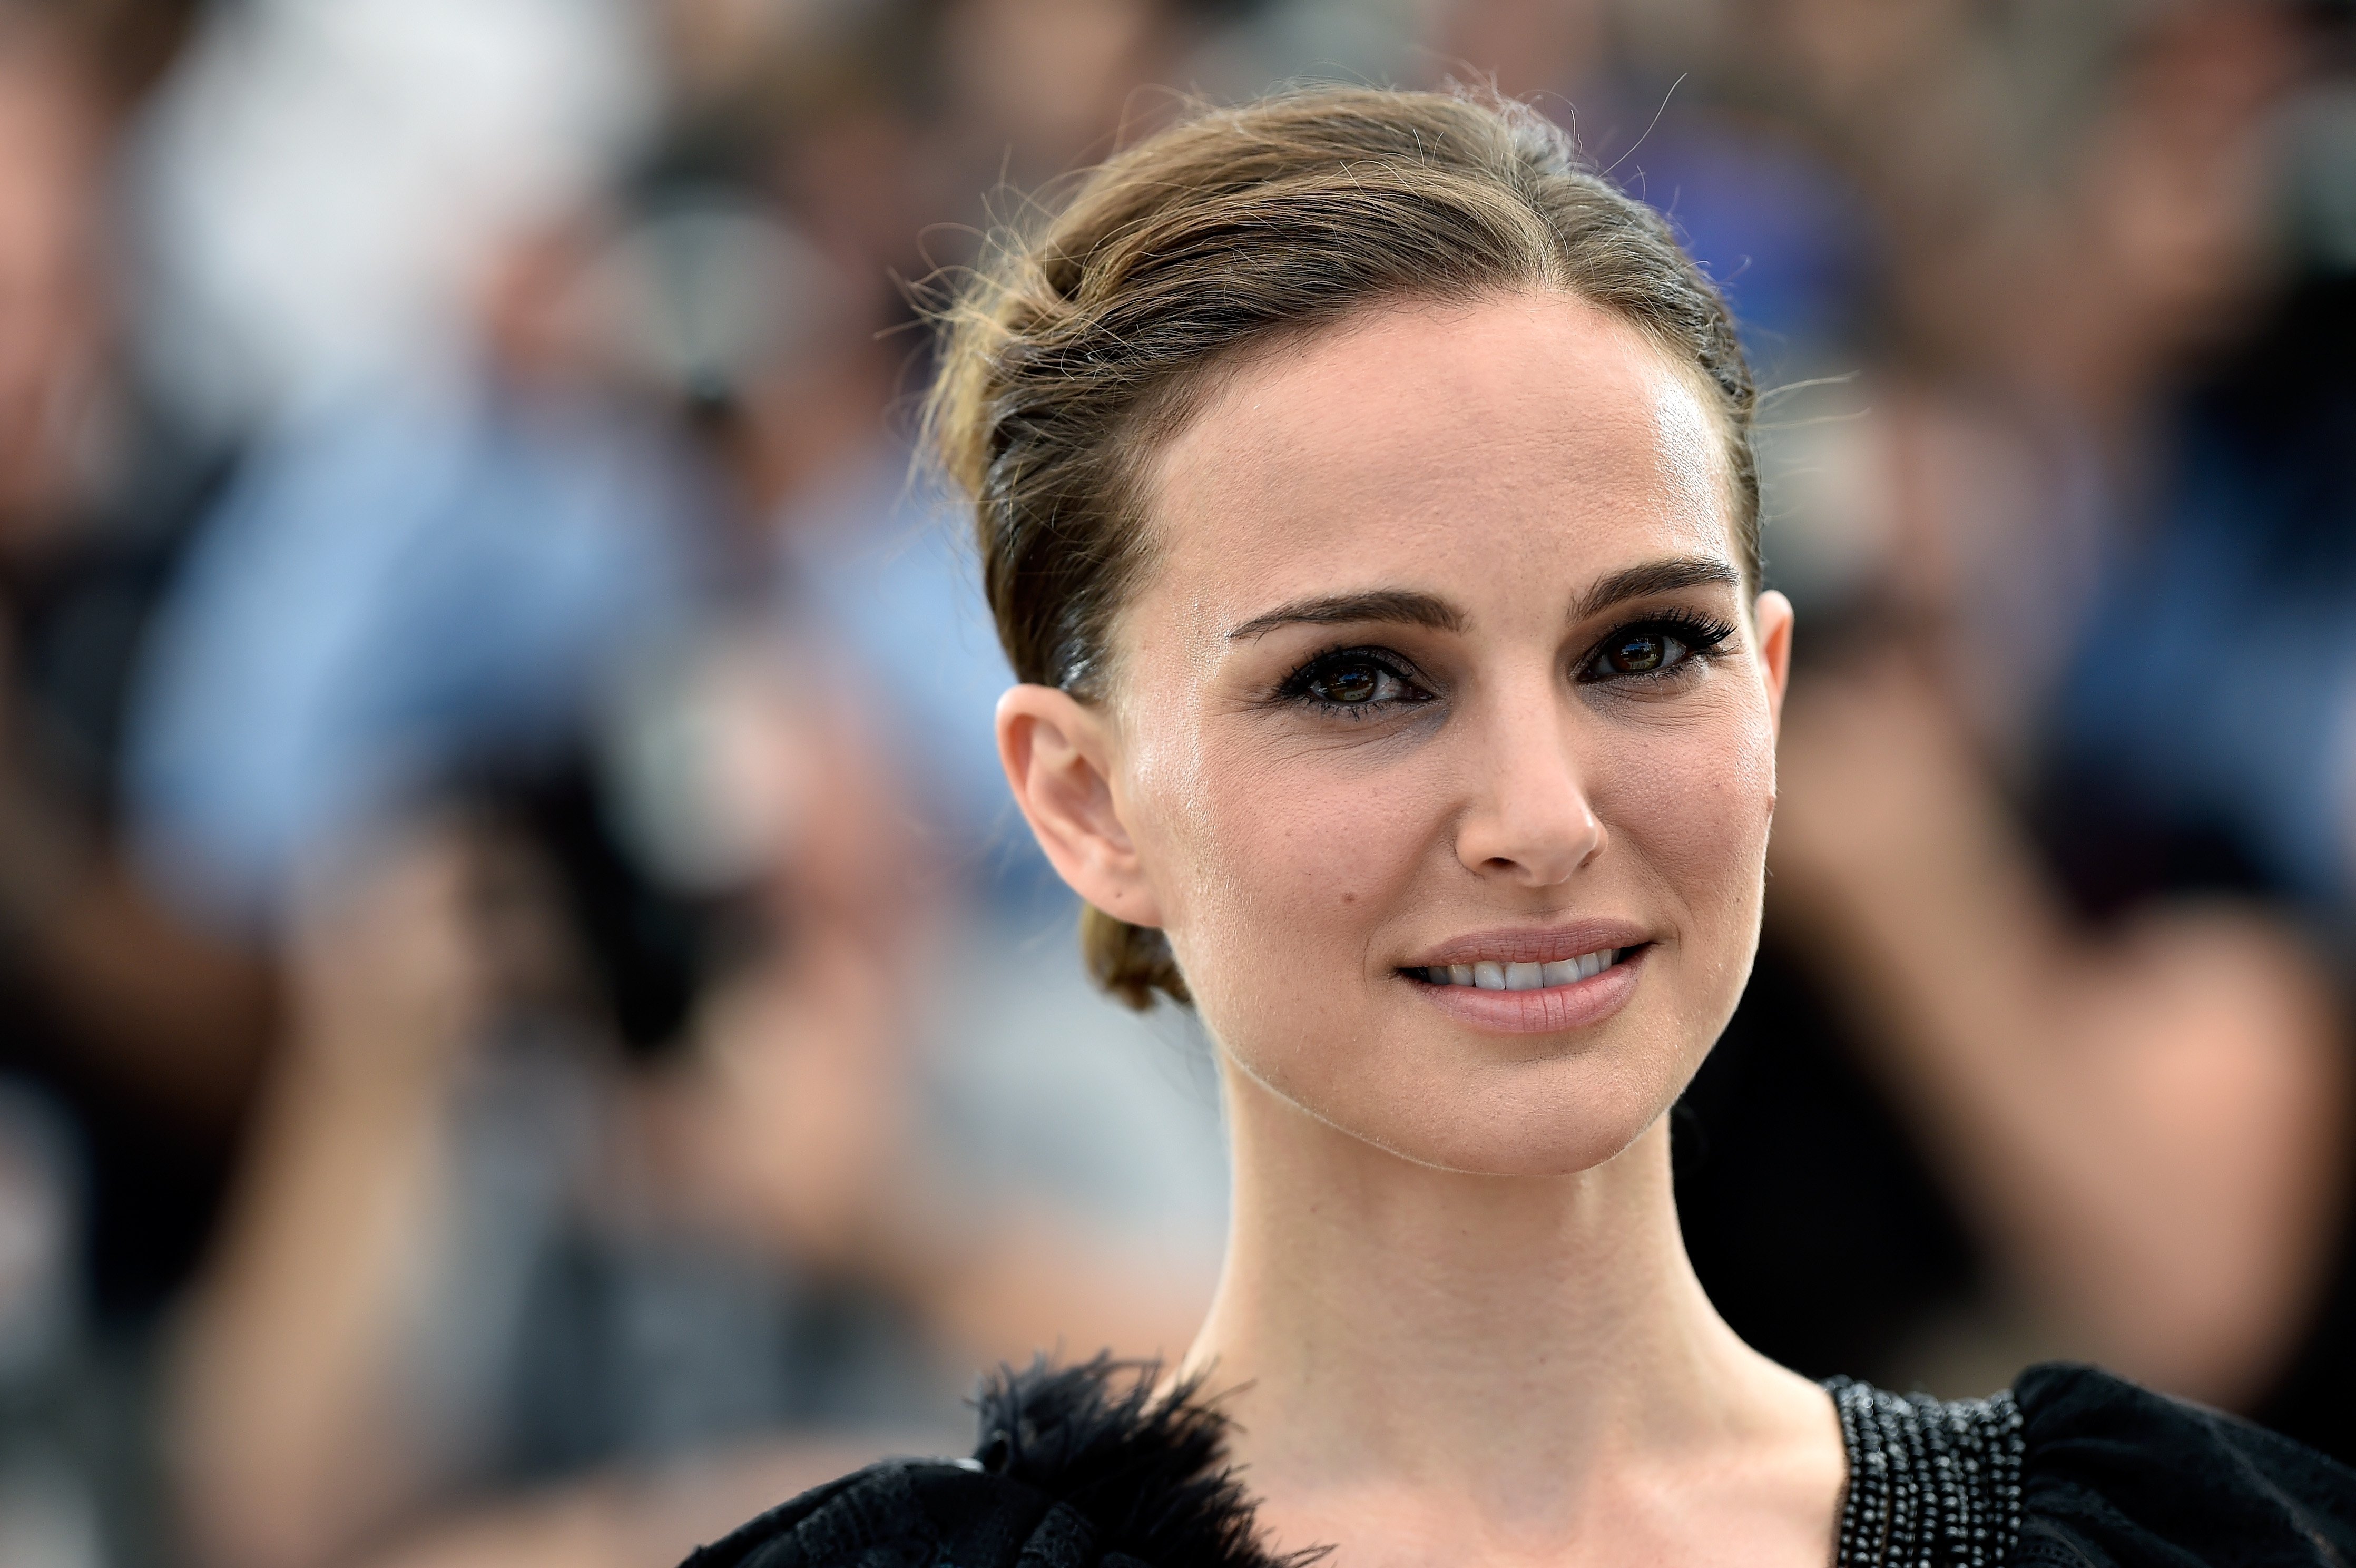 Natalie Portman attends a photocall for 'A Tale Of Love And Darkness' during the 68th annual Cannes Film Festival on May 17, 2015